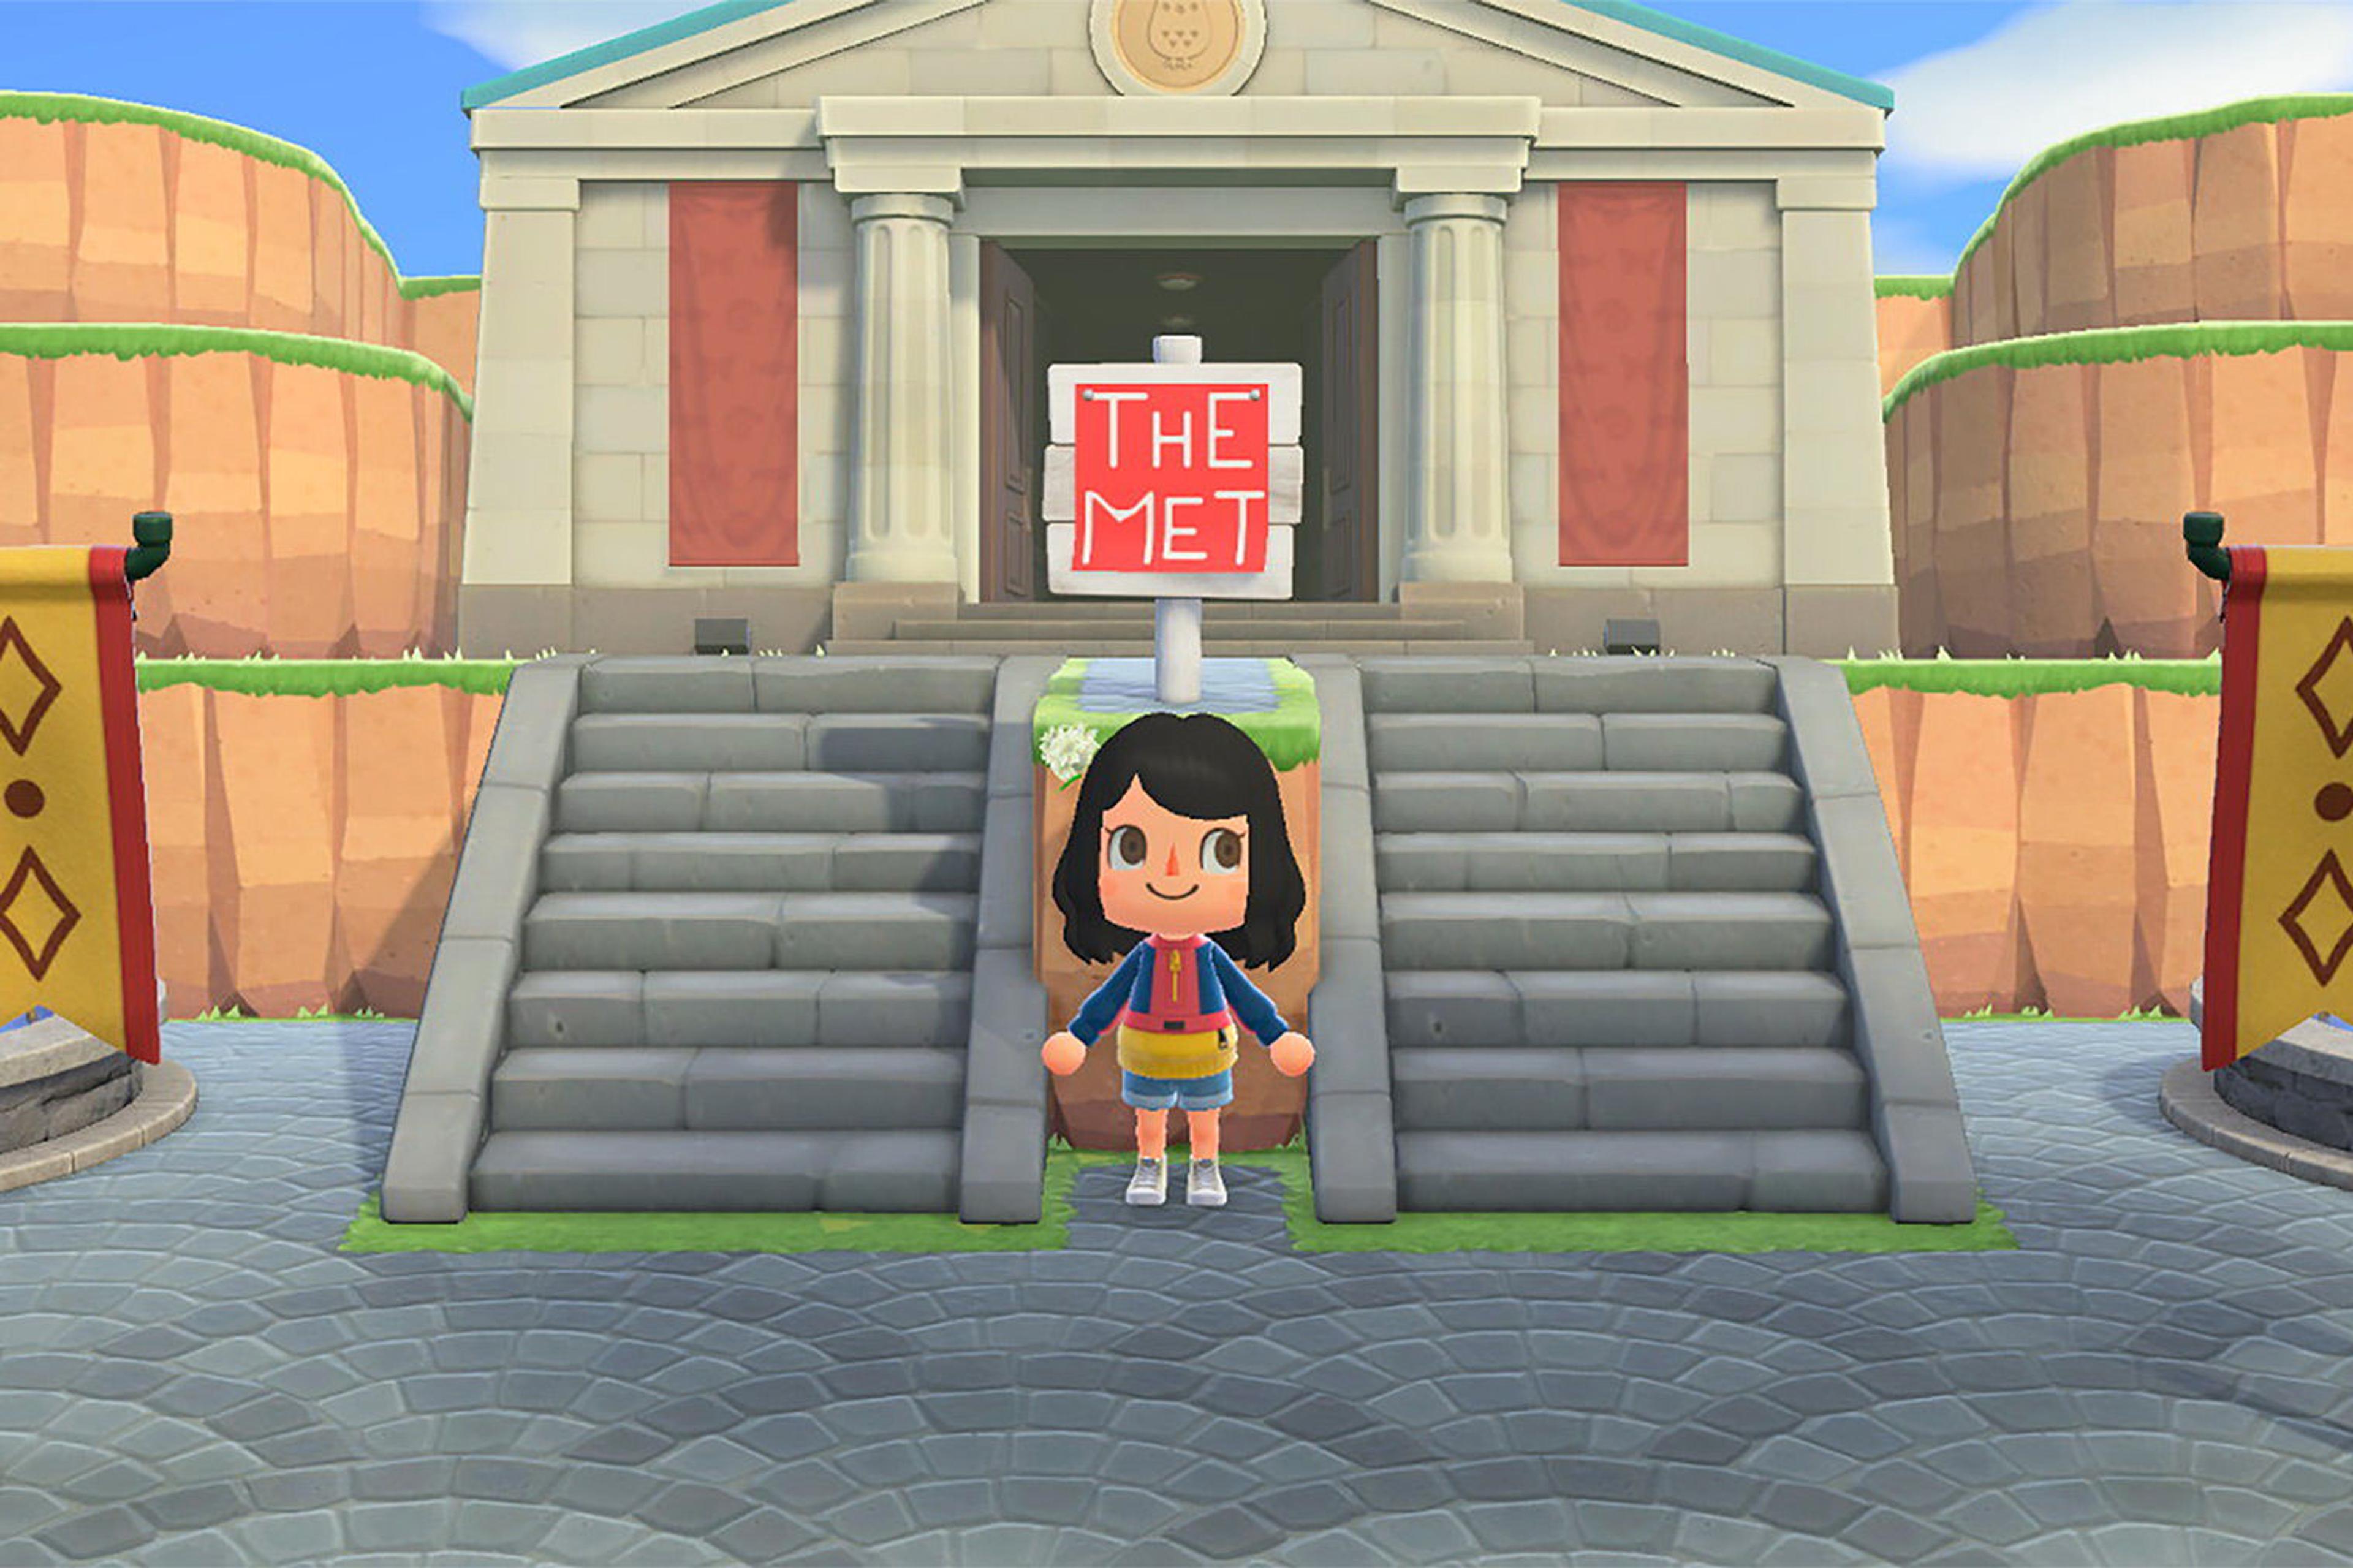 A screenshot from Animal Crossing depicting a museum that looks like The Met